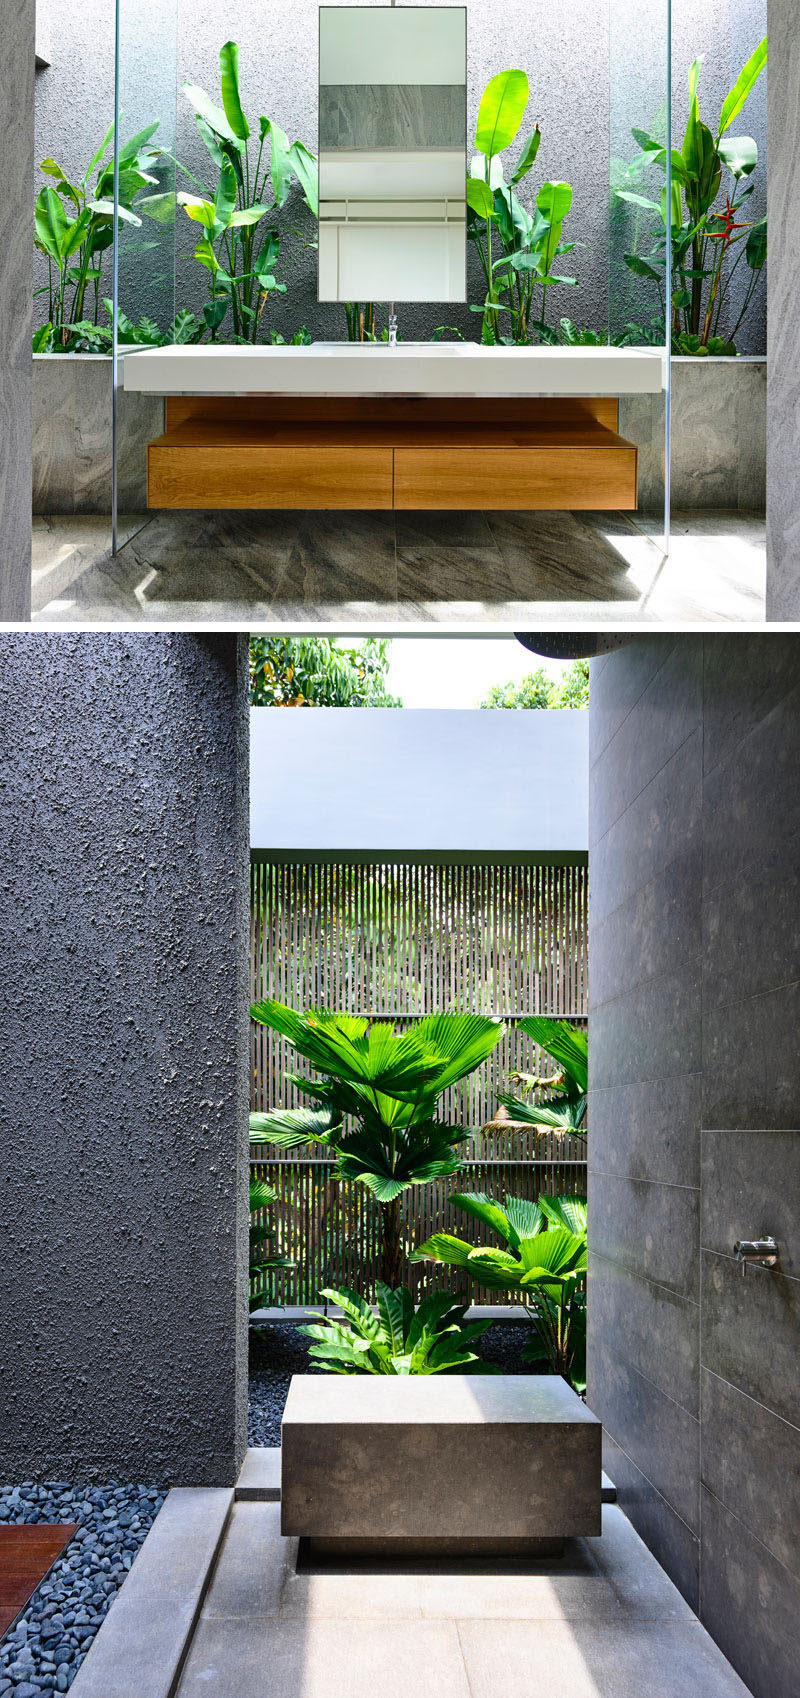 This bathroom is full of natural materials and tropical plants.